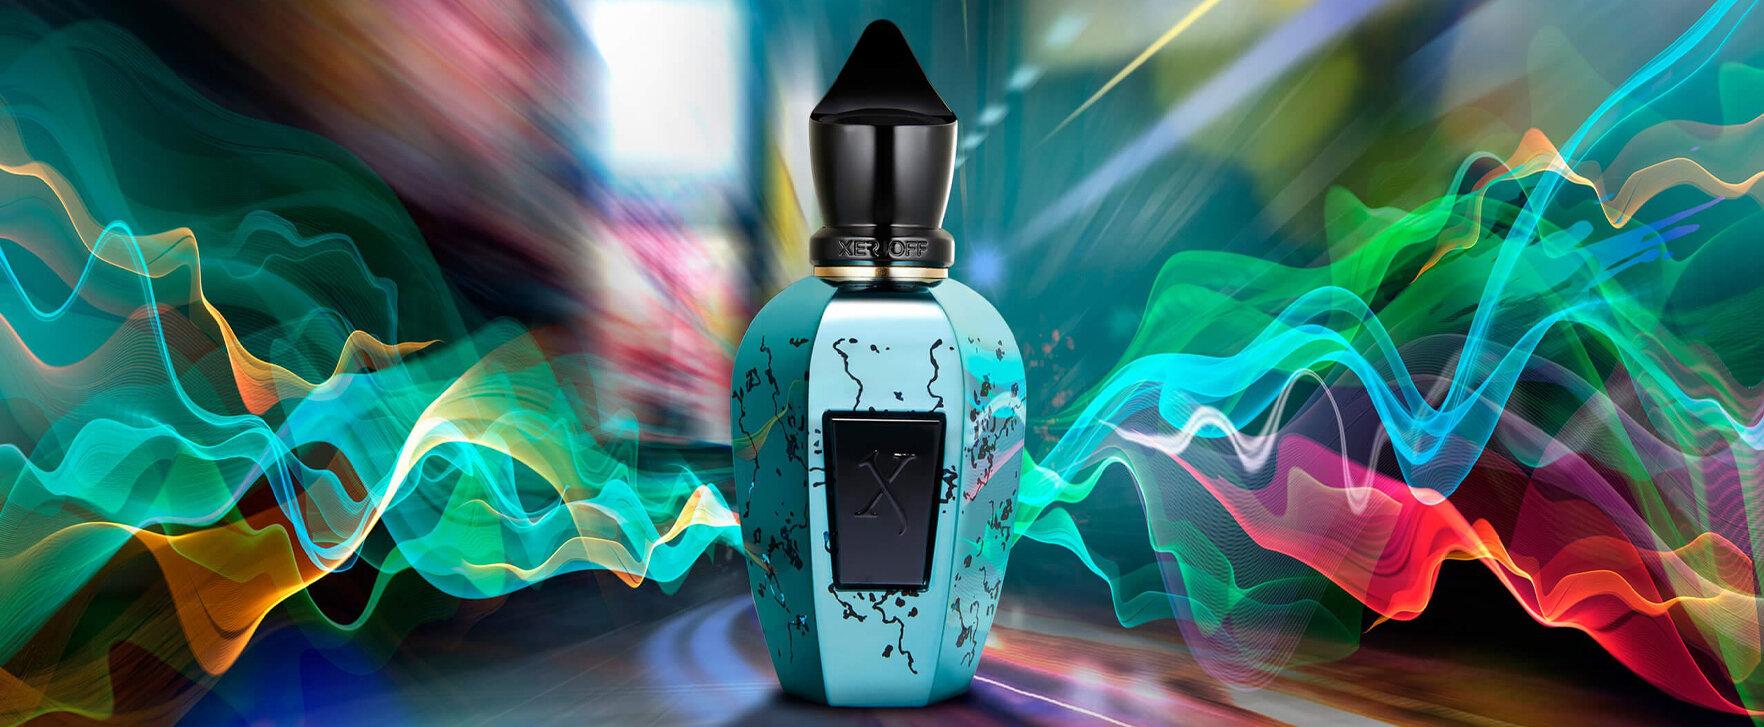 “Groove Xcape” - New Xerjoff Fragrance in Collaboration With Max Casacci